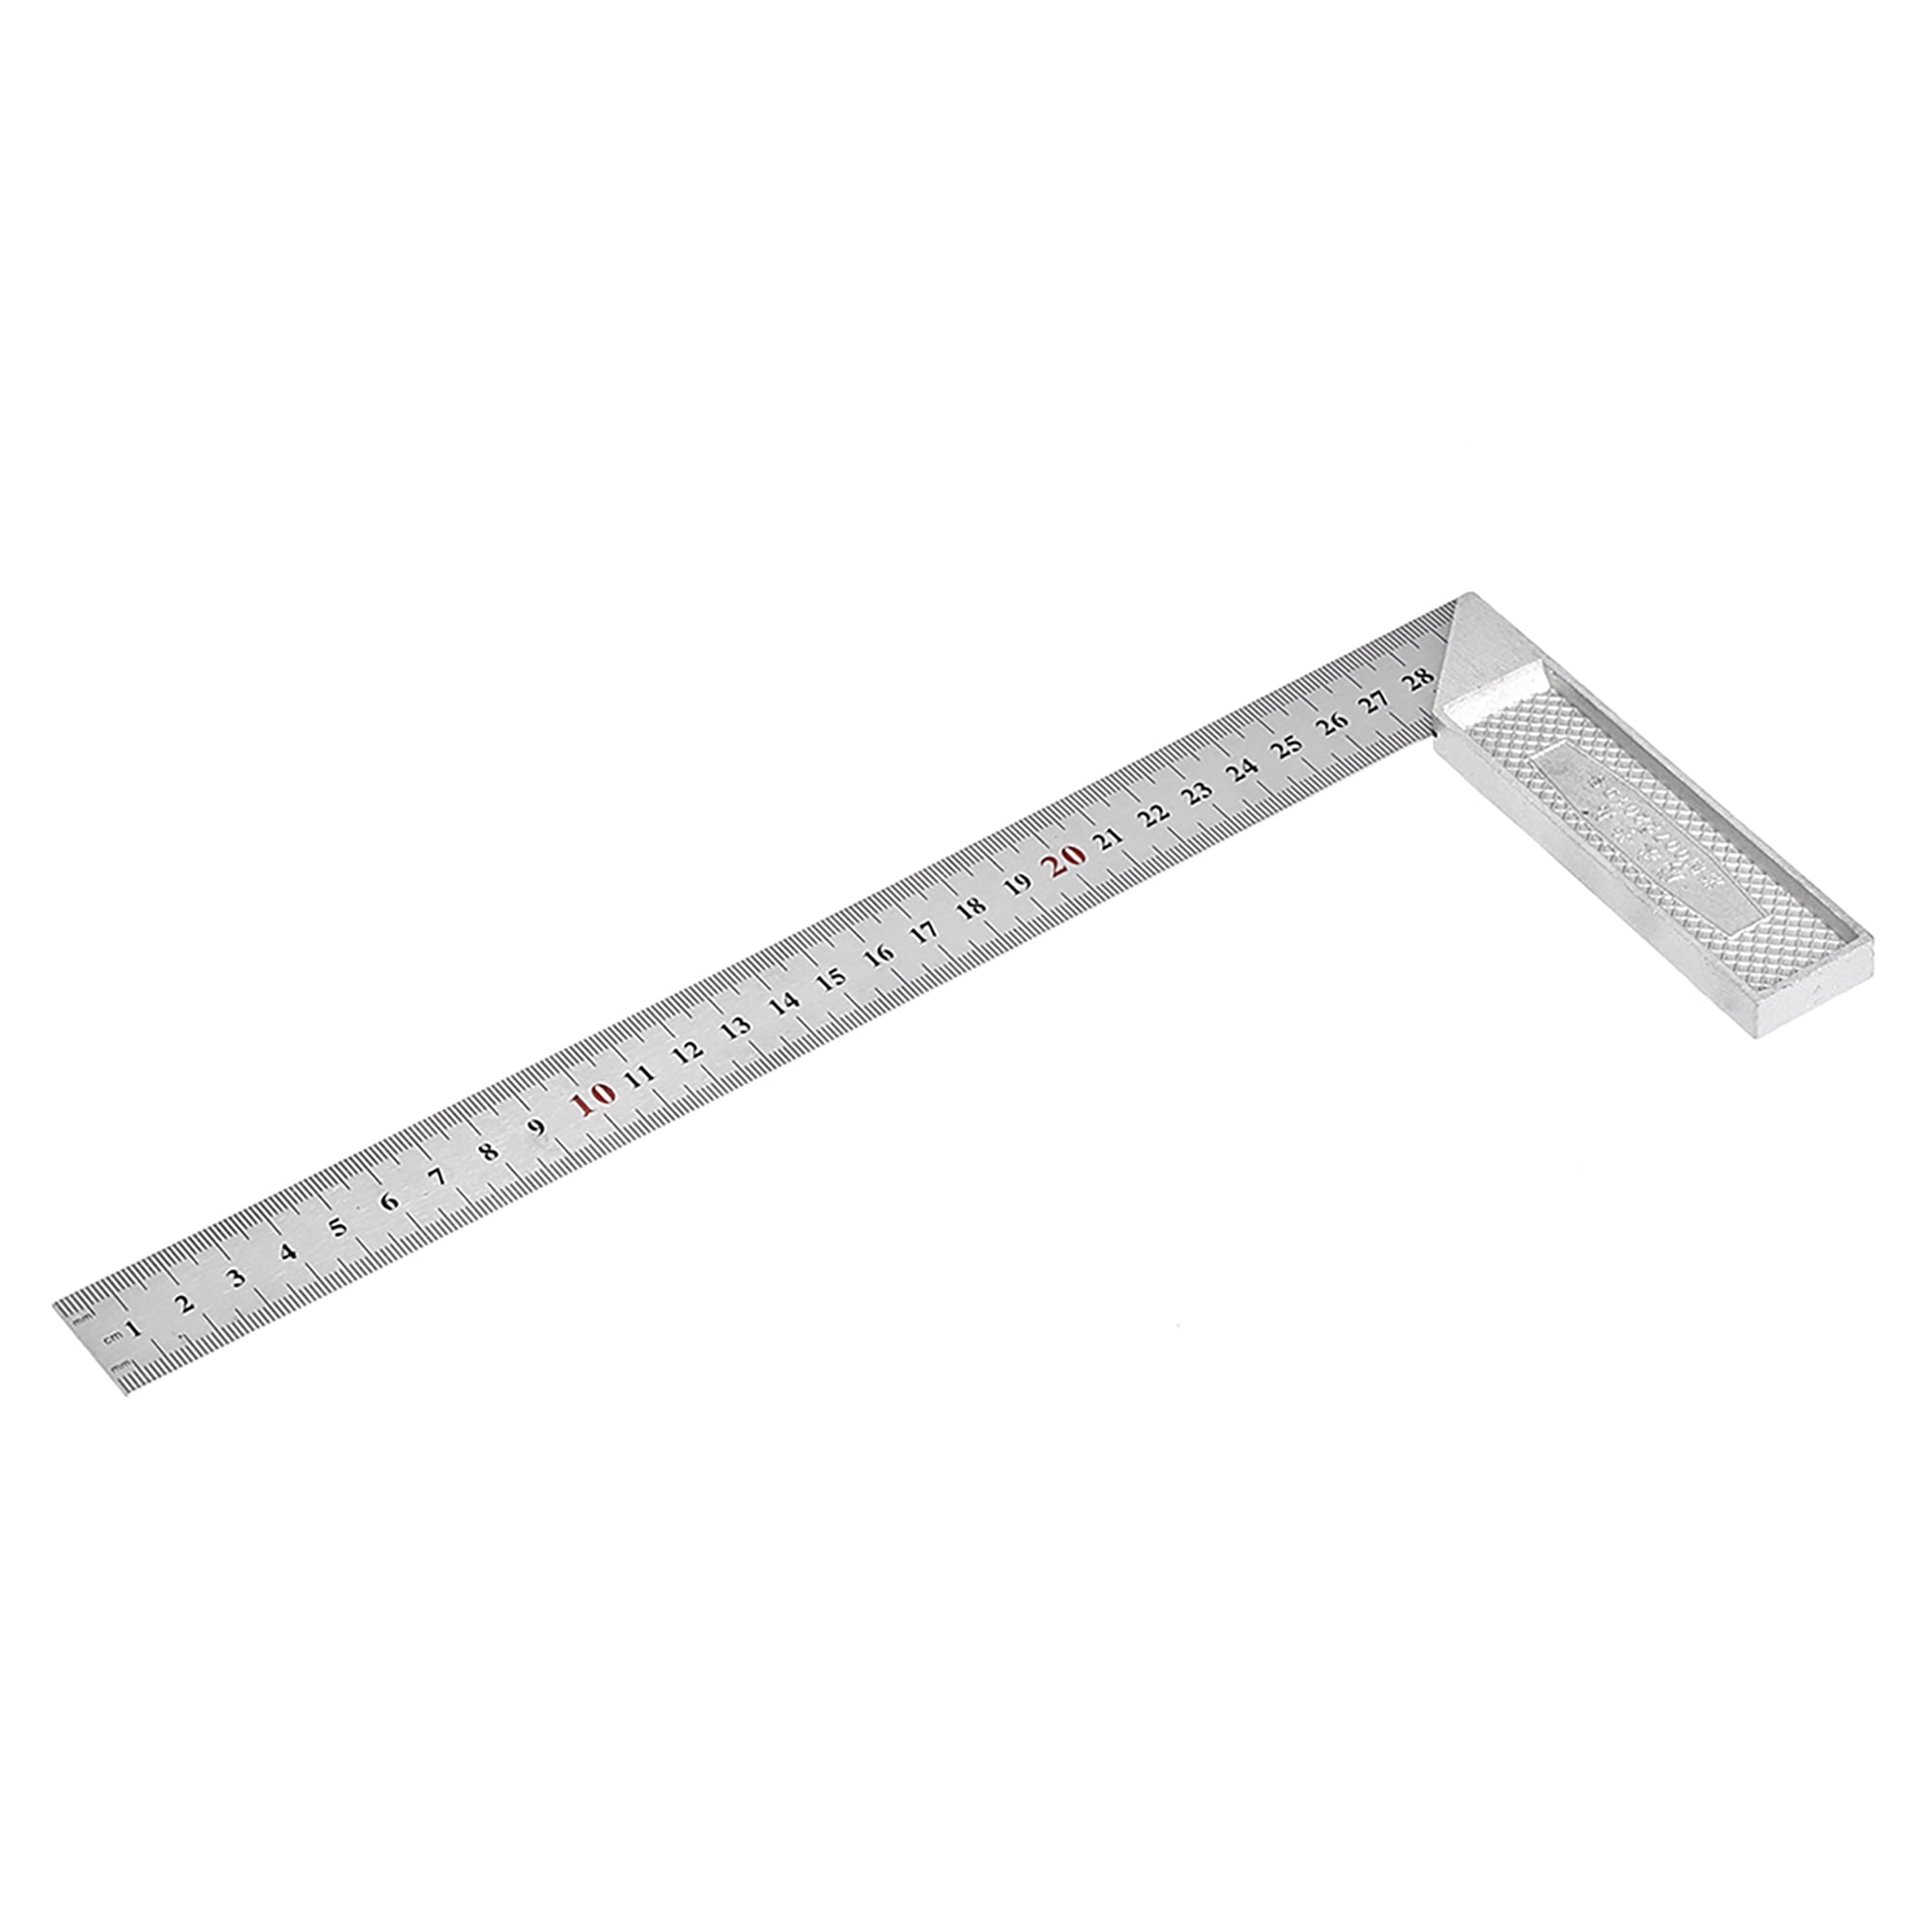 Adjustable Multi Angle Measuring Ruler Drill Tile Tools Template Tool Folding Ruler for Carpenters DIY Layout Tools Measuring Fold, Single Section